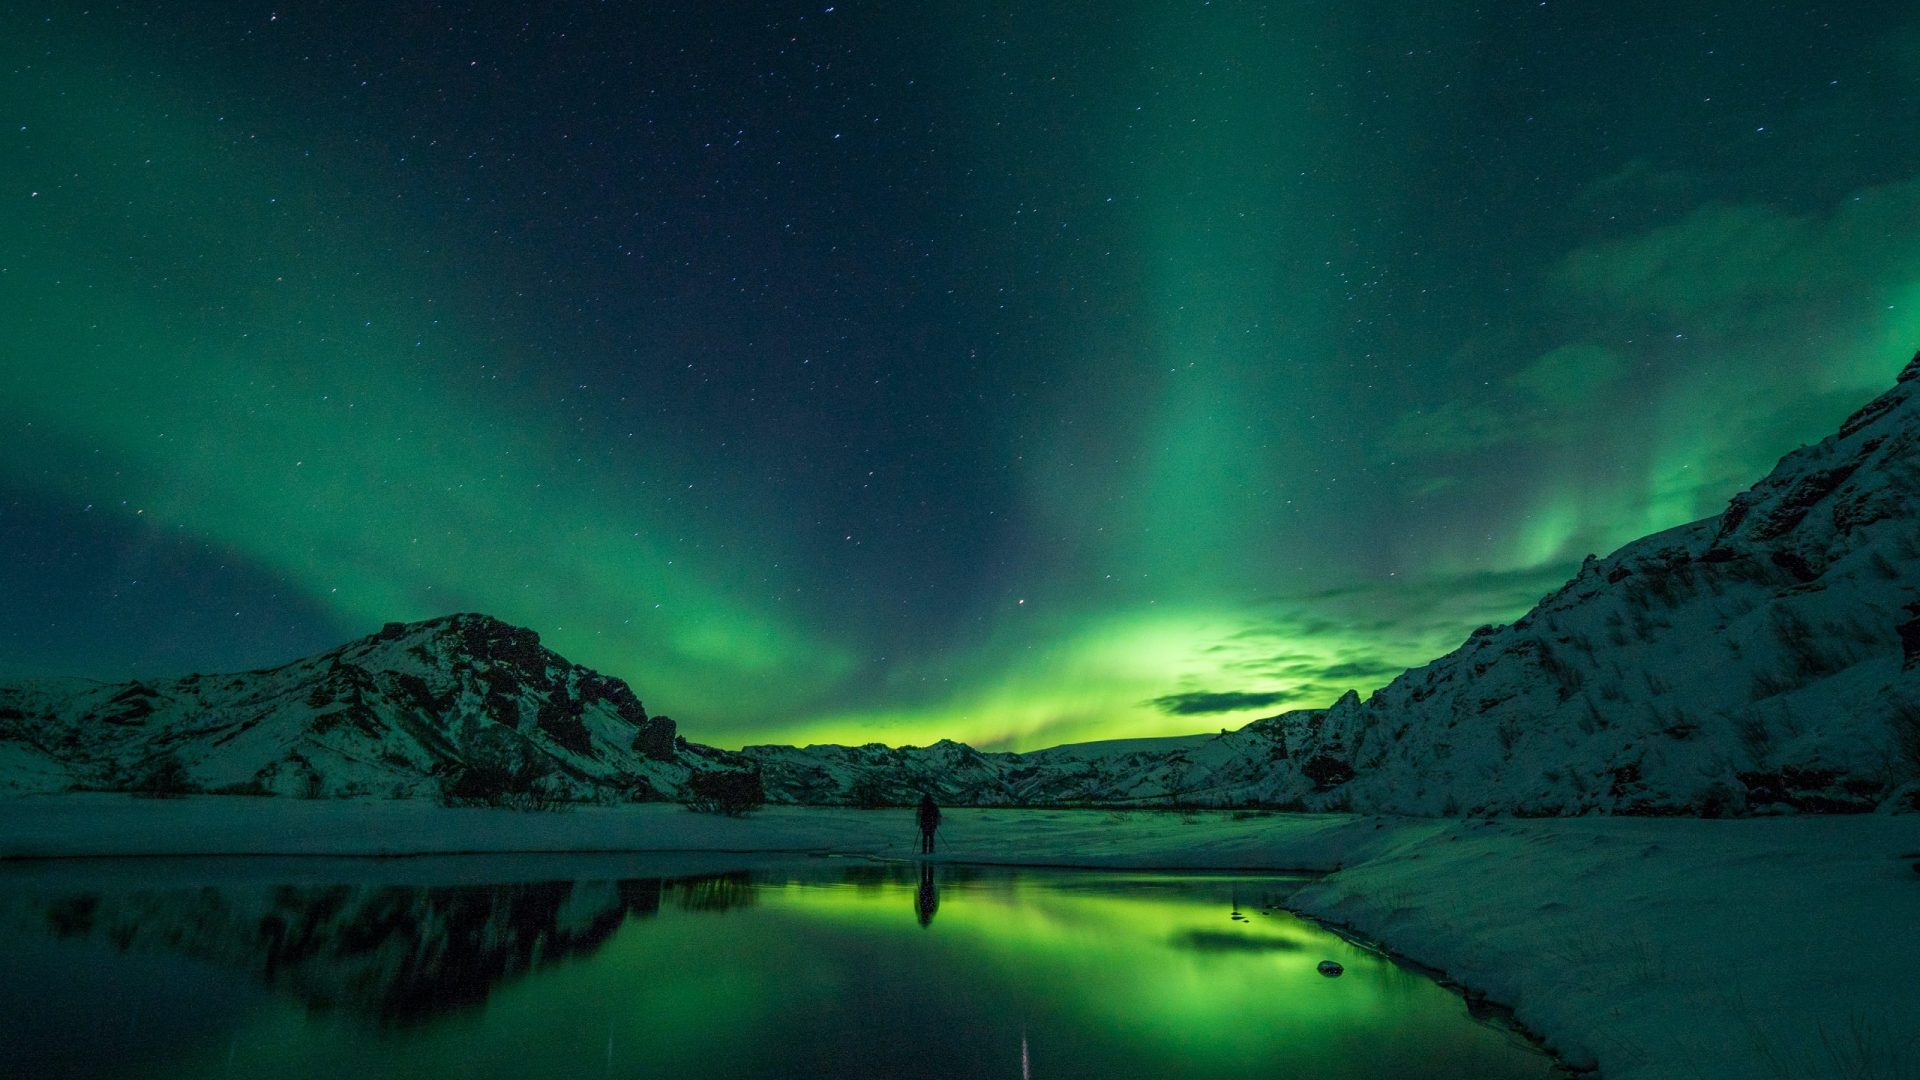 Do the northern lights make sounds that you can hear?